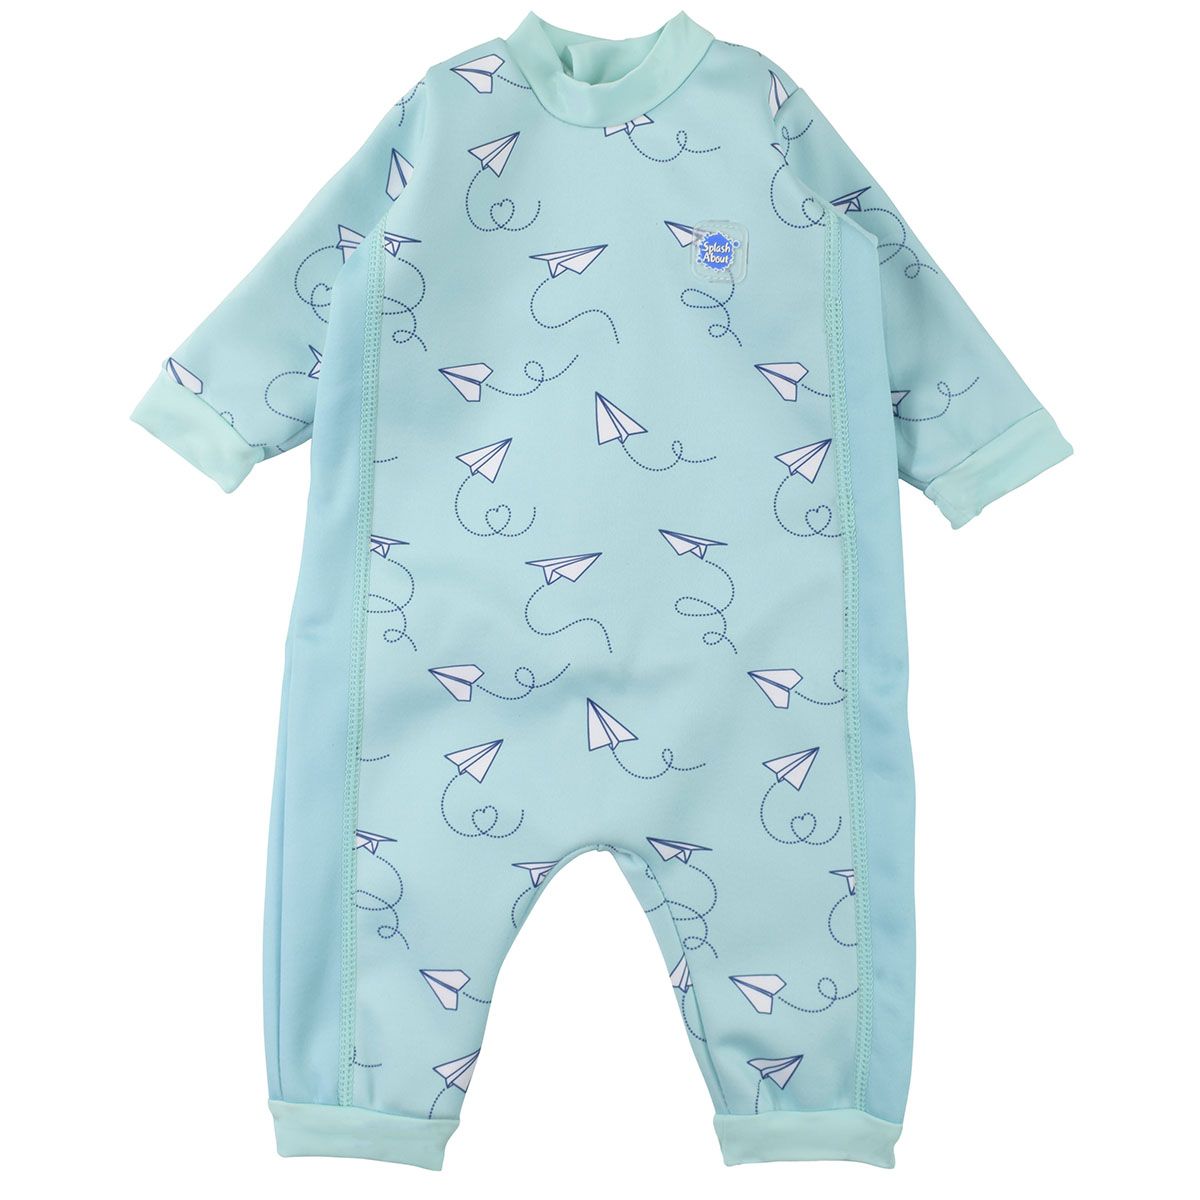 Fleece-lined baby wetsuit in baby blue and minimalist paper planes print. Front.